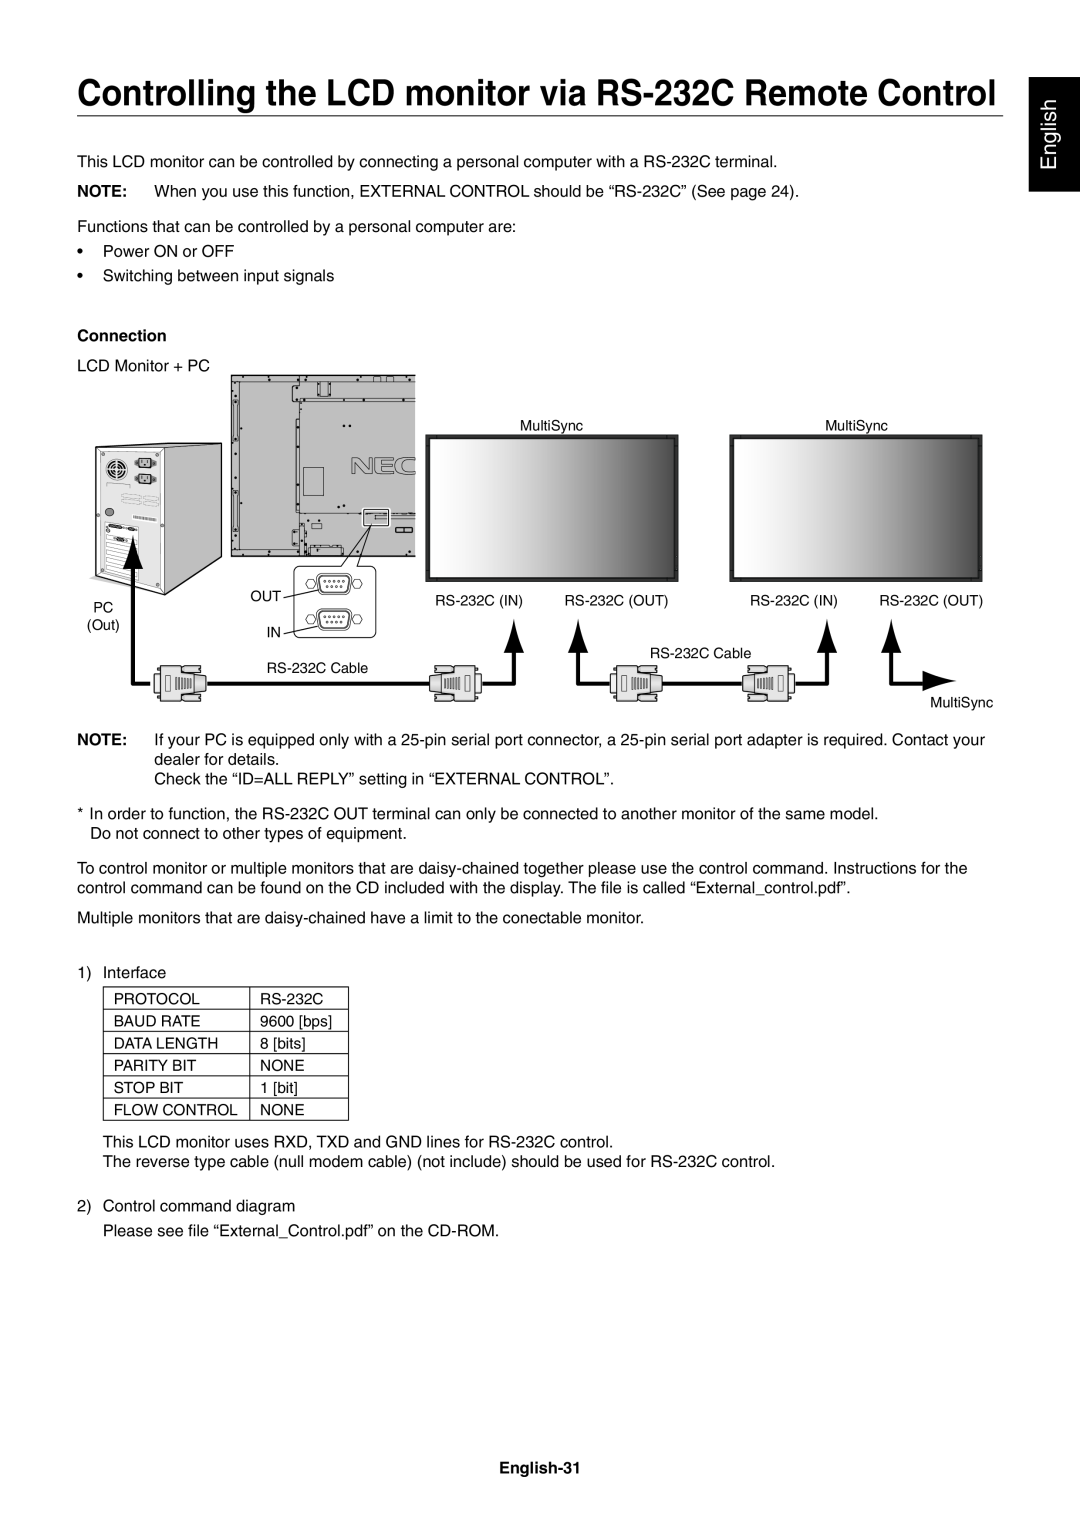 NEC V462, V651 user manual Controlling the LCD monitor via RS-232C Remote Control, Connection, English-31 